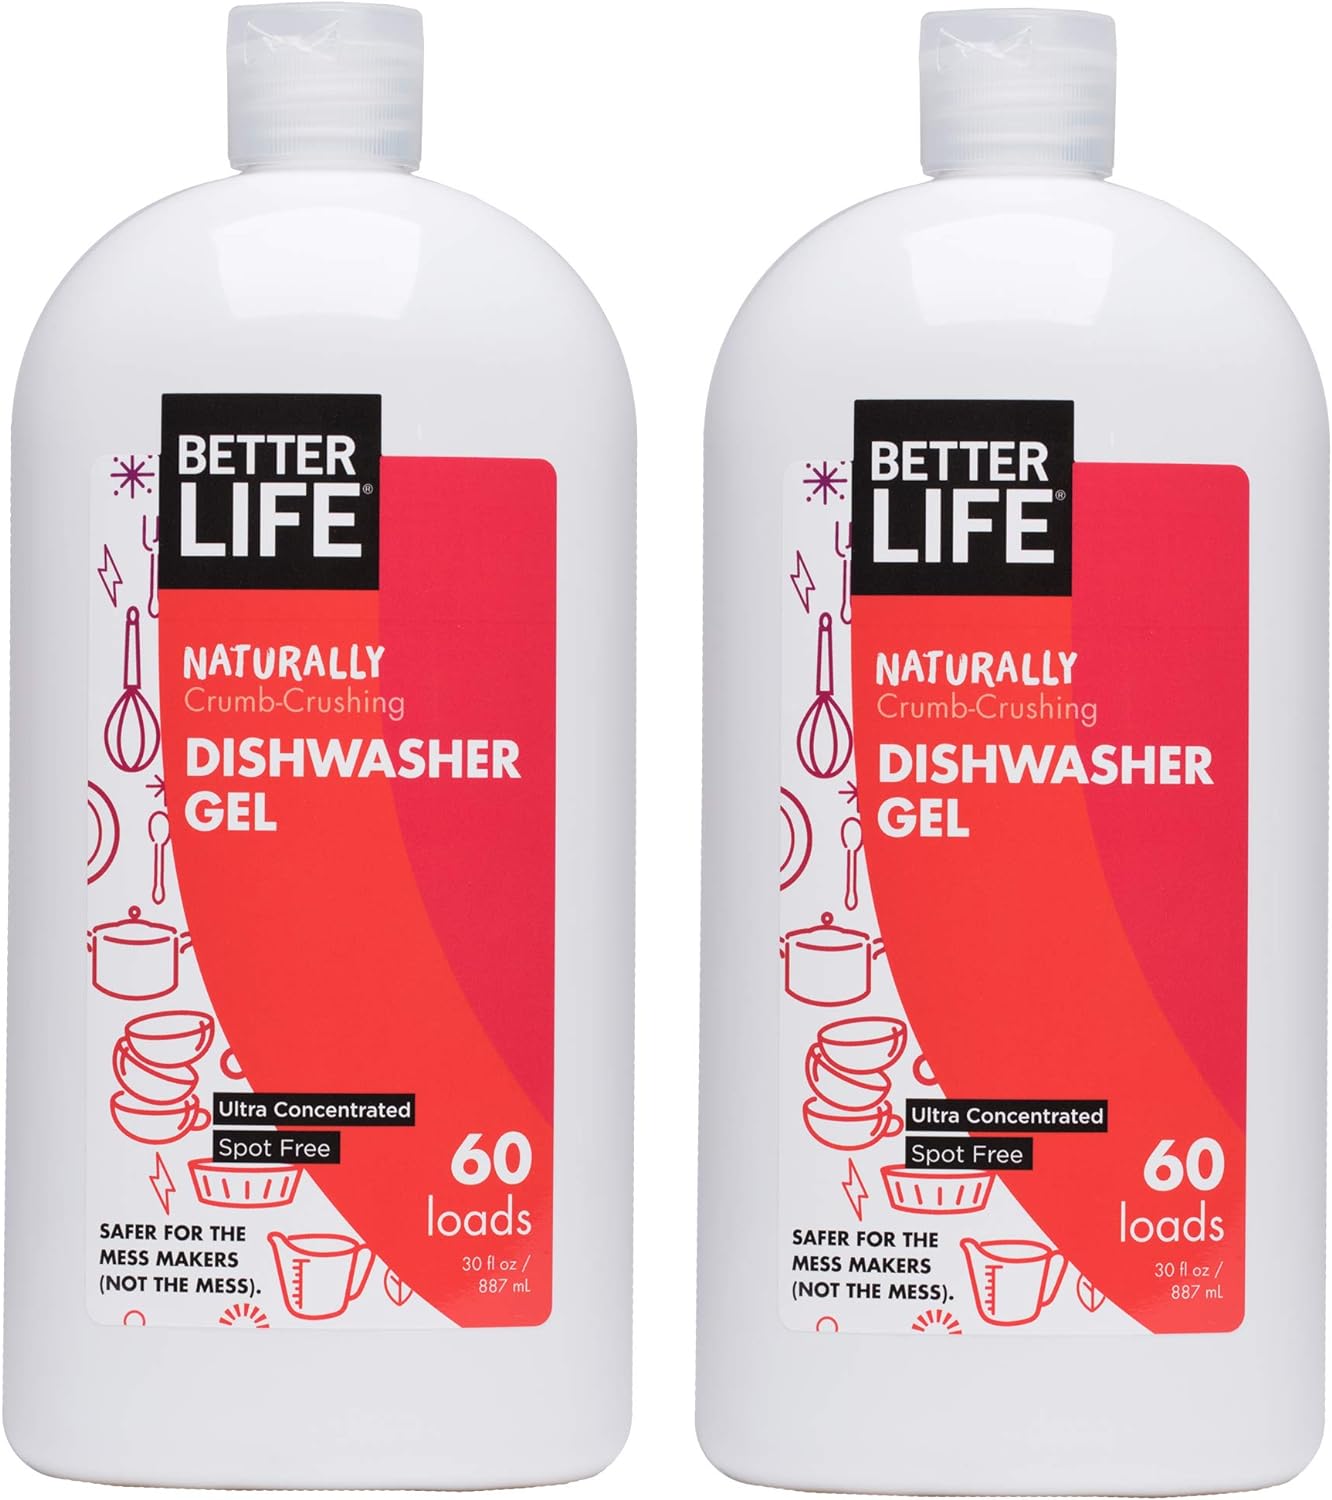 I look for a detergent that won't leave behind chemical residue and would be safe for us since we eat off the dishes obv. This one is rated well on EWG and is a great price compared to the other safe detergents out there. The squeeze top is great and easy to use.